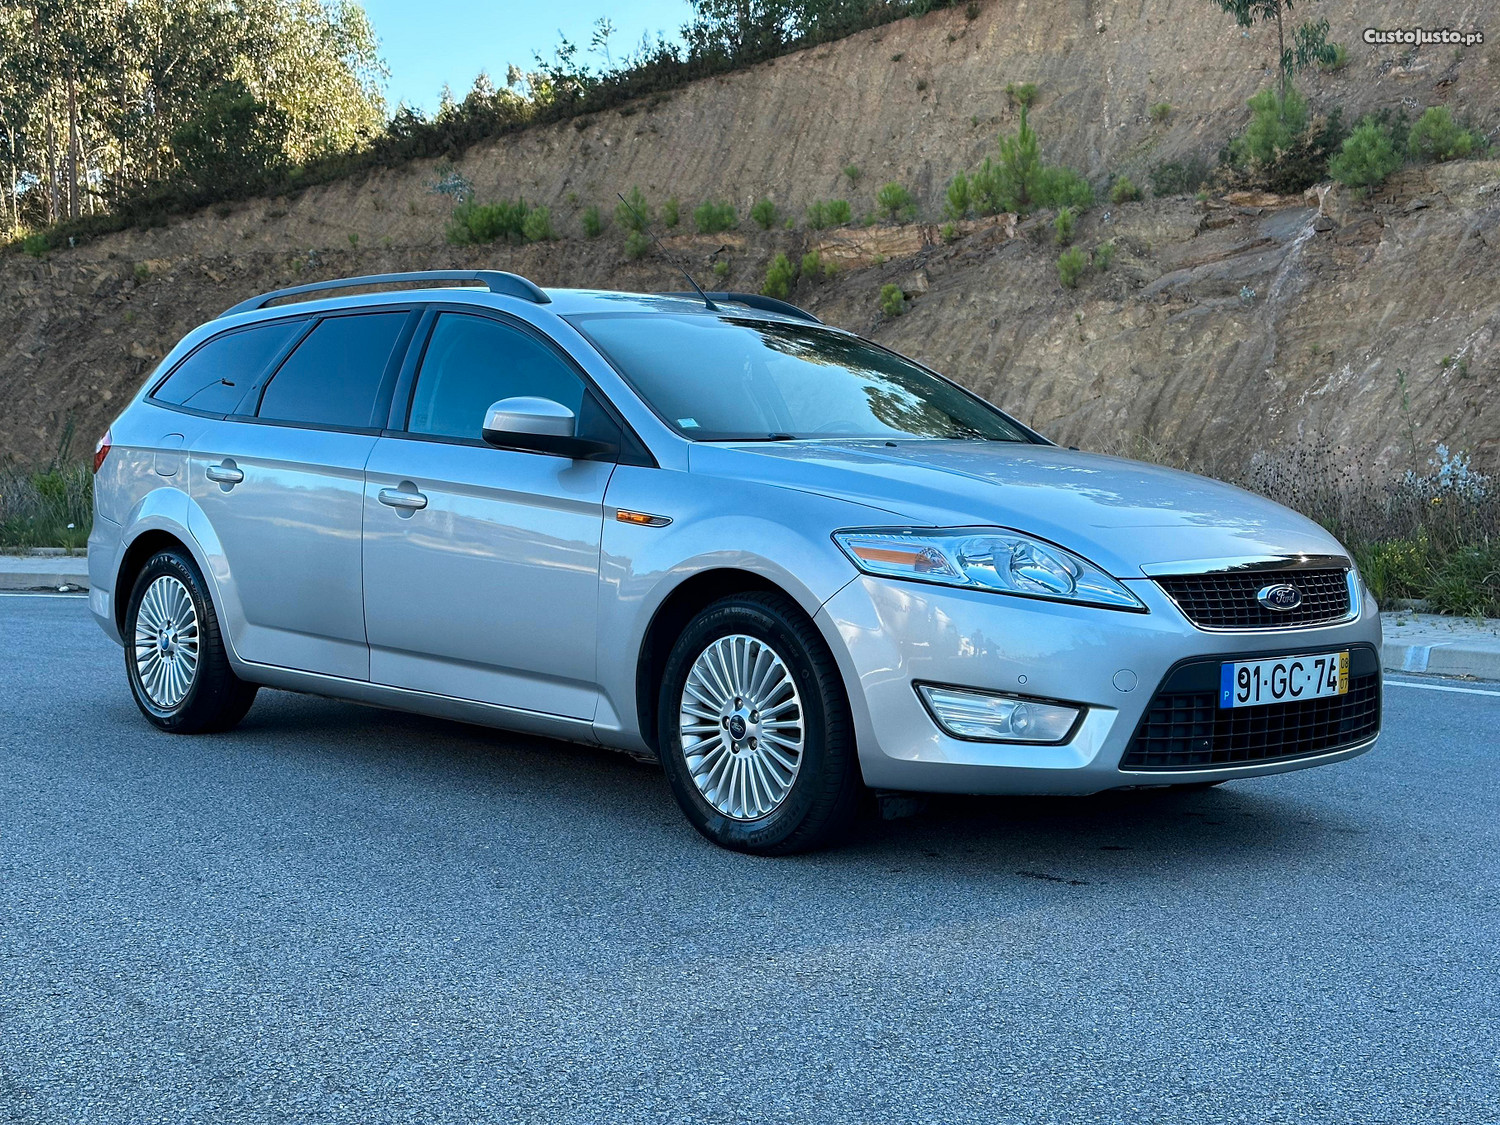 Ford Mondeo 1.8 Tdci 129mil kms